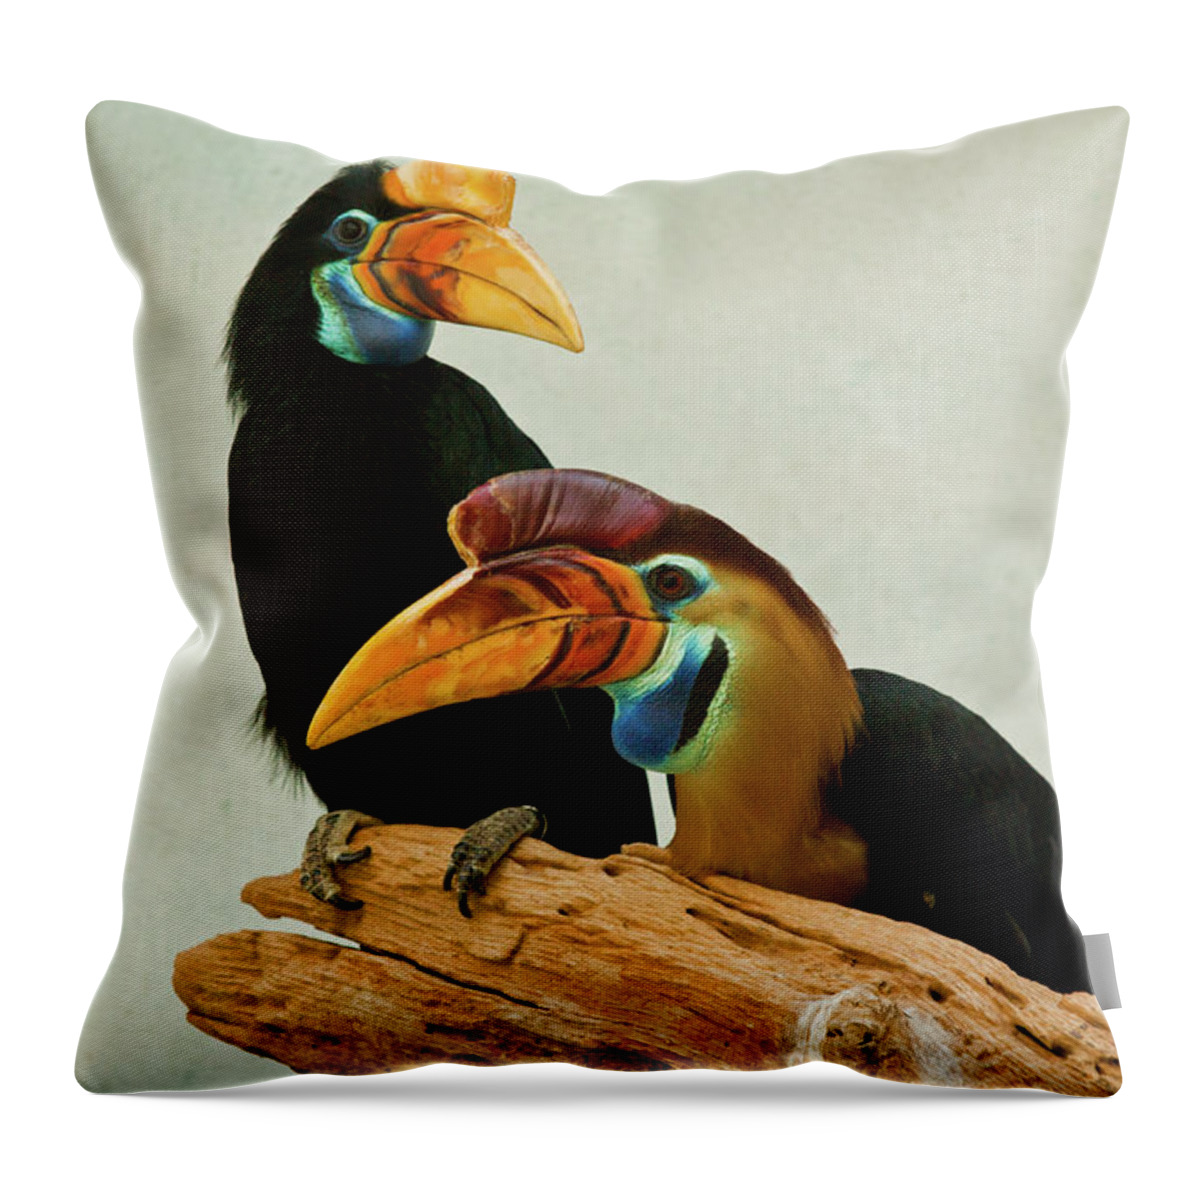 Animal Themes Throw Pillow featuring the photograph Prism by Wassim Samara